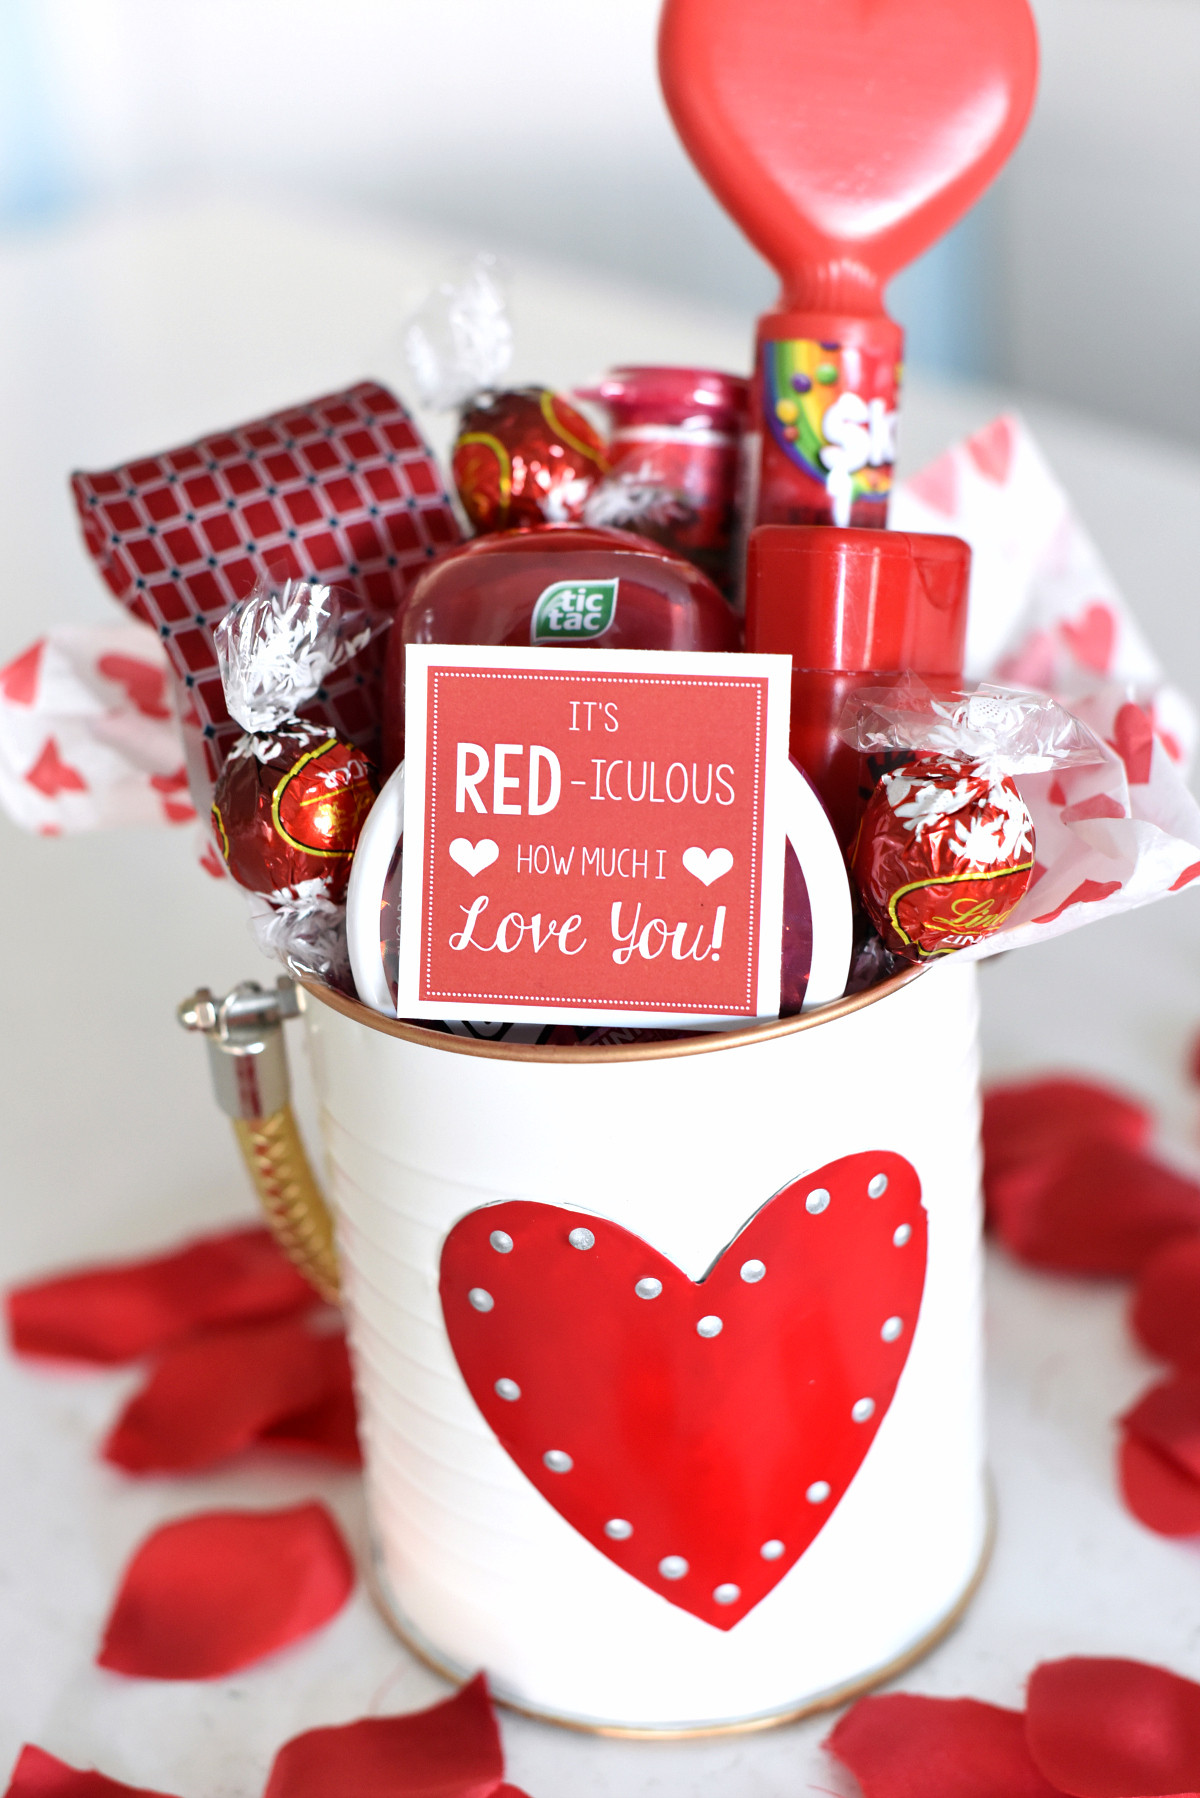 Valentines Gift For Husband Ideas
 Cute Valentine s Day Gift Idea RED iculous Basket